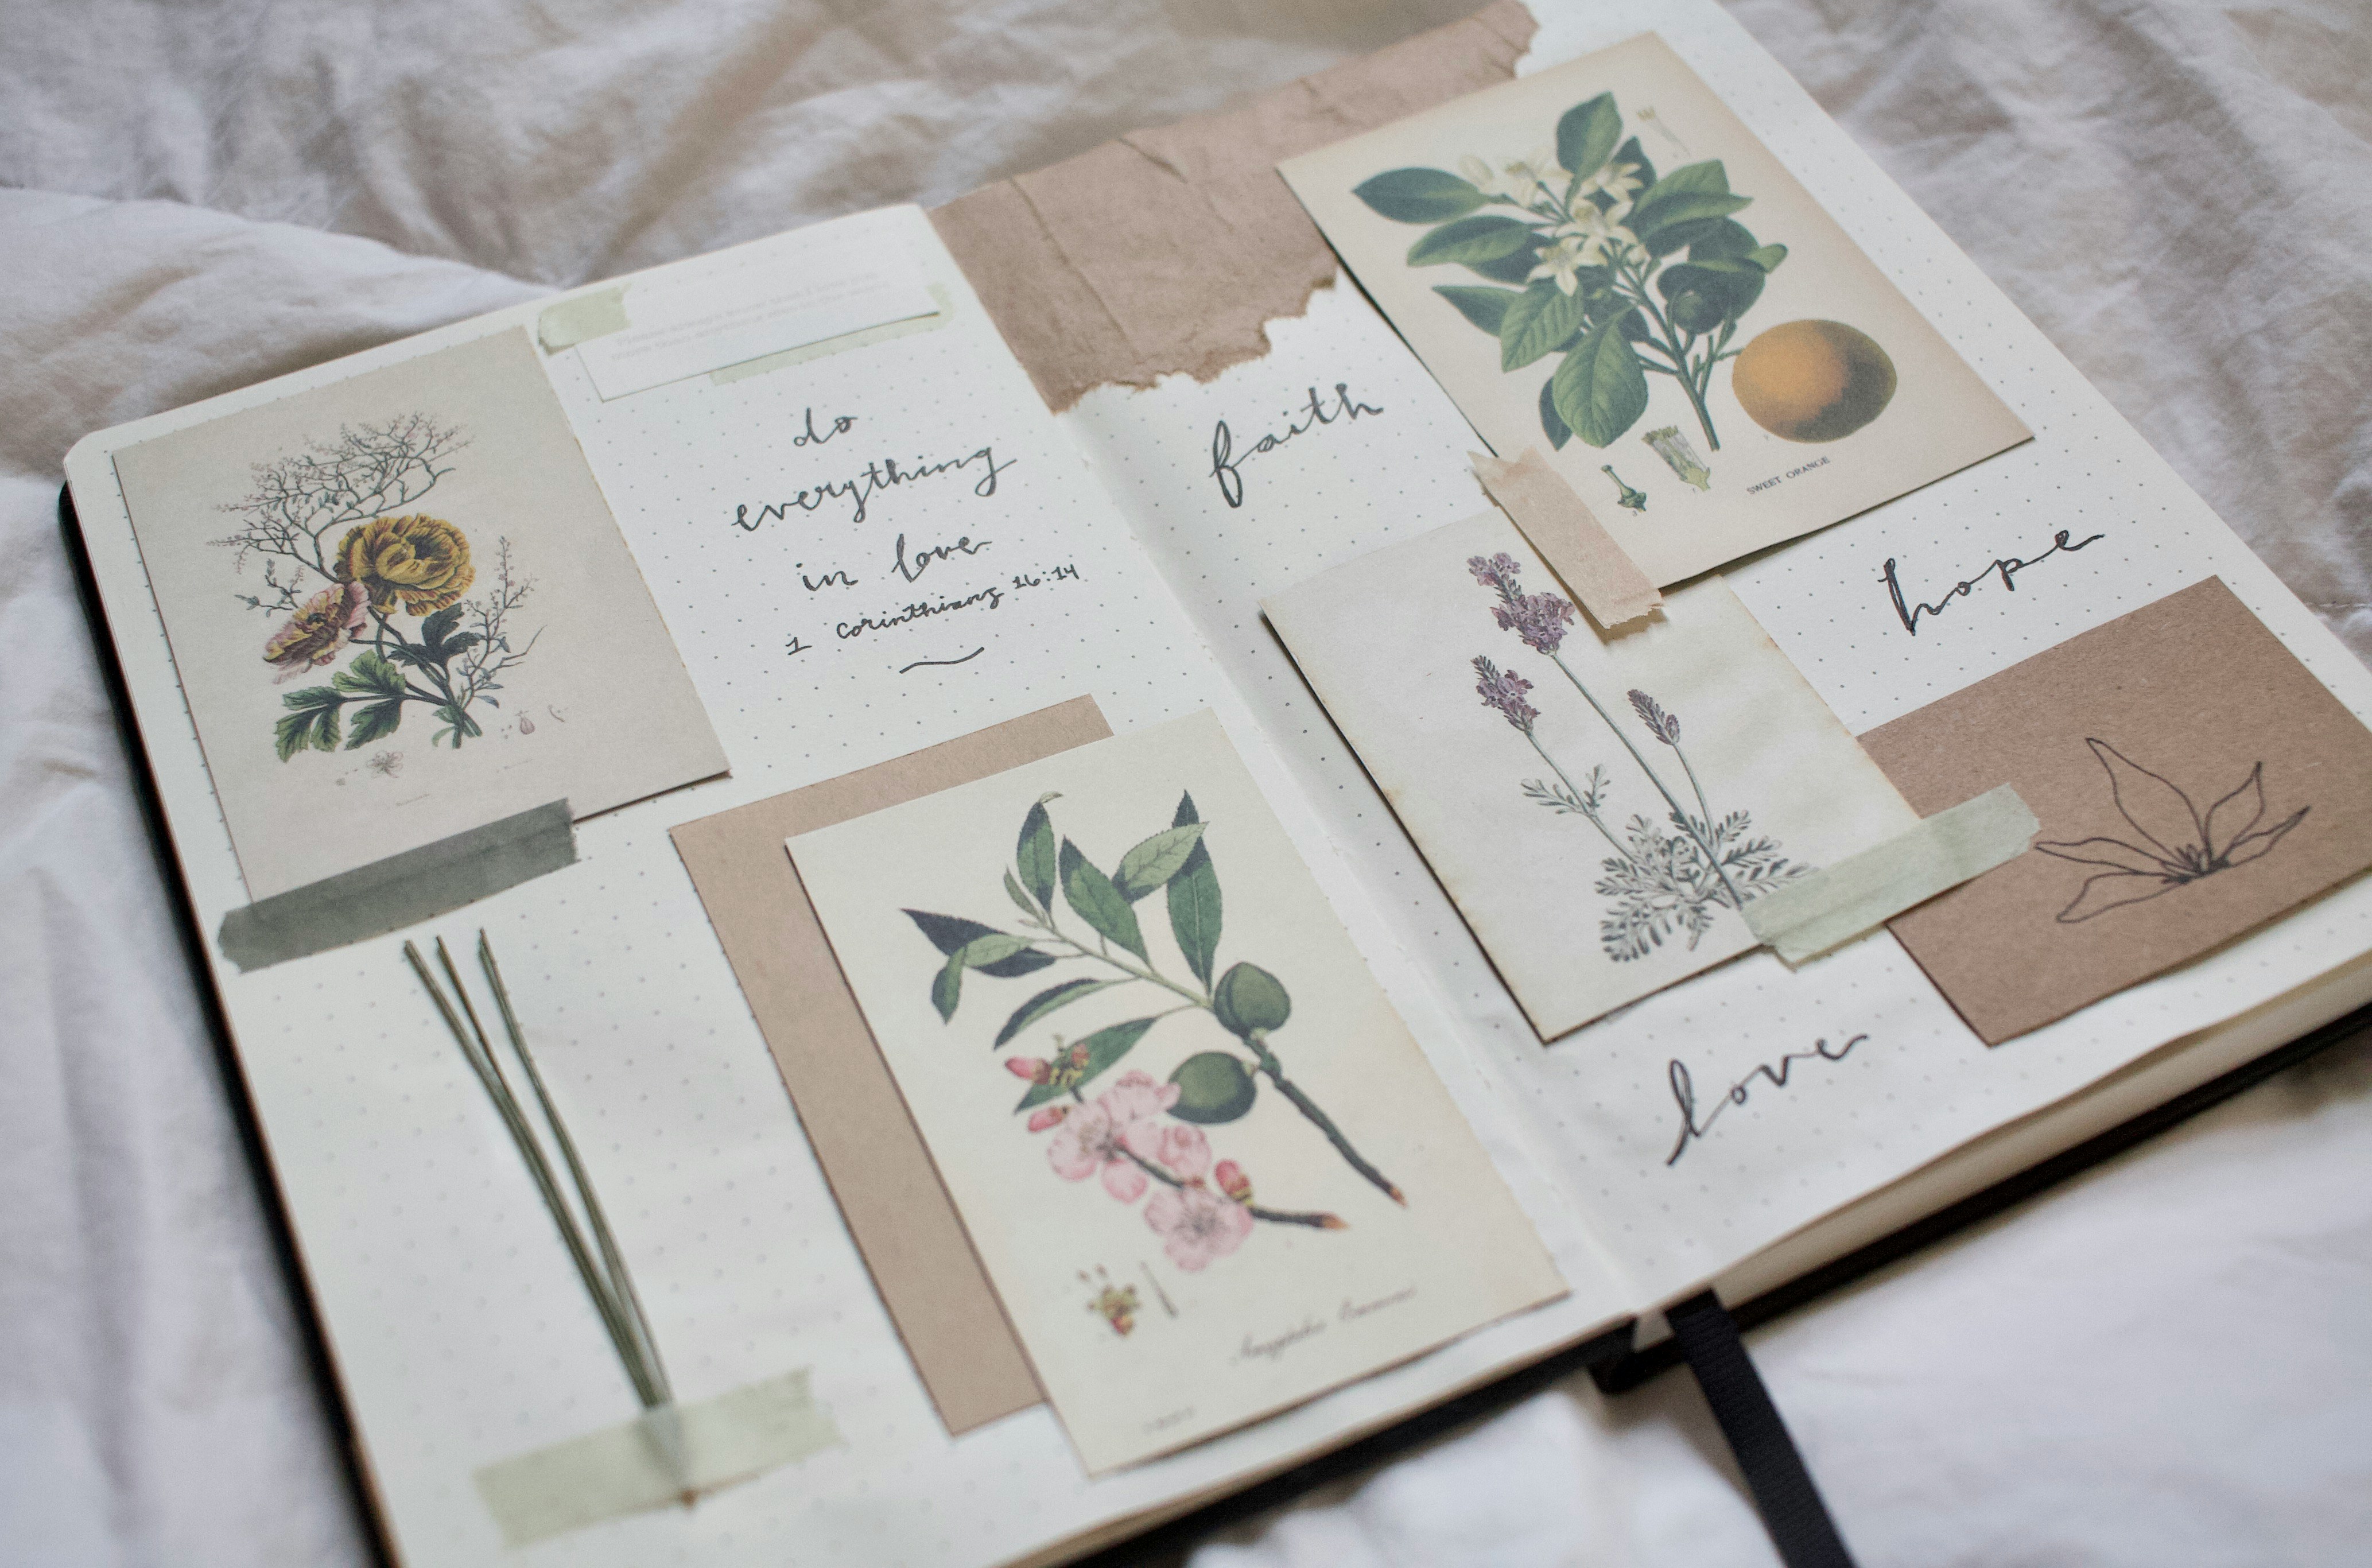 a book with pictures of flowers and notes